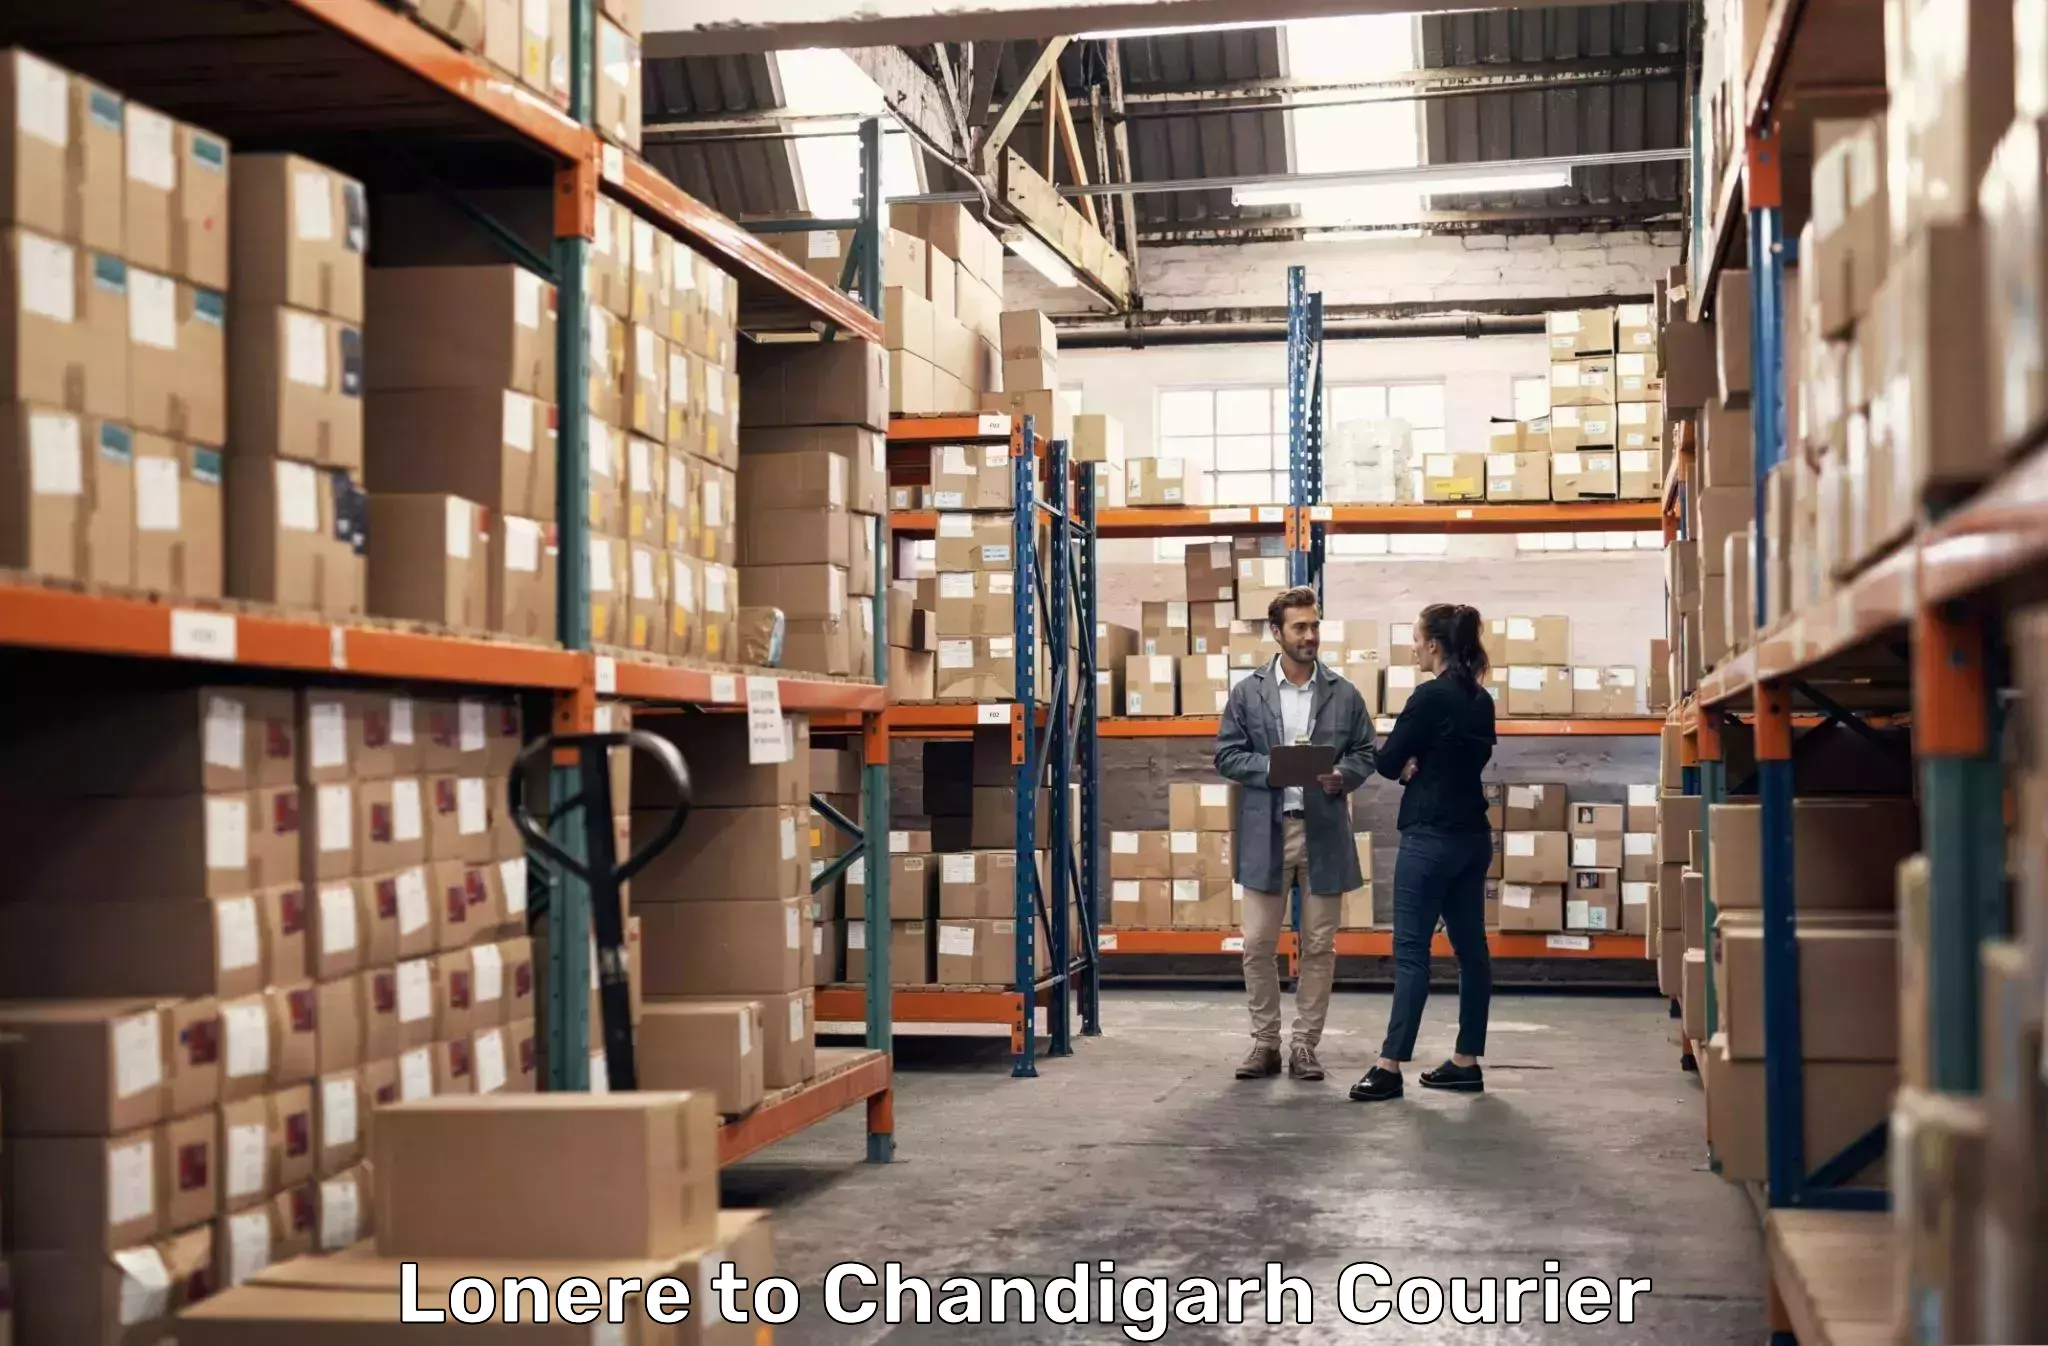 Express courier capabilities Lonere to Chandigarh